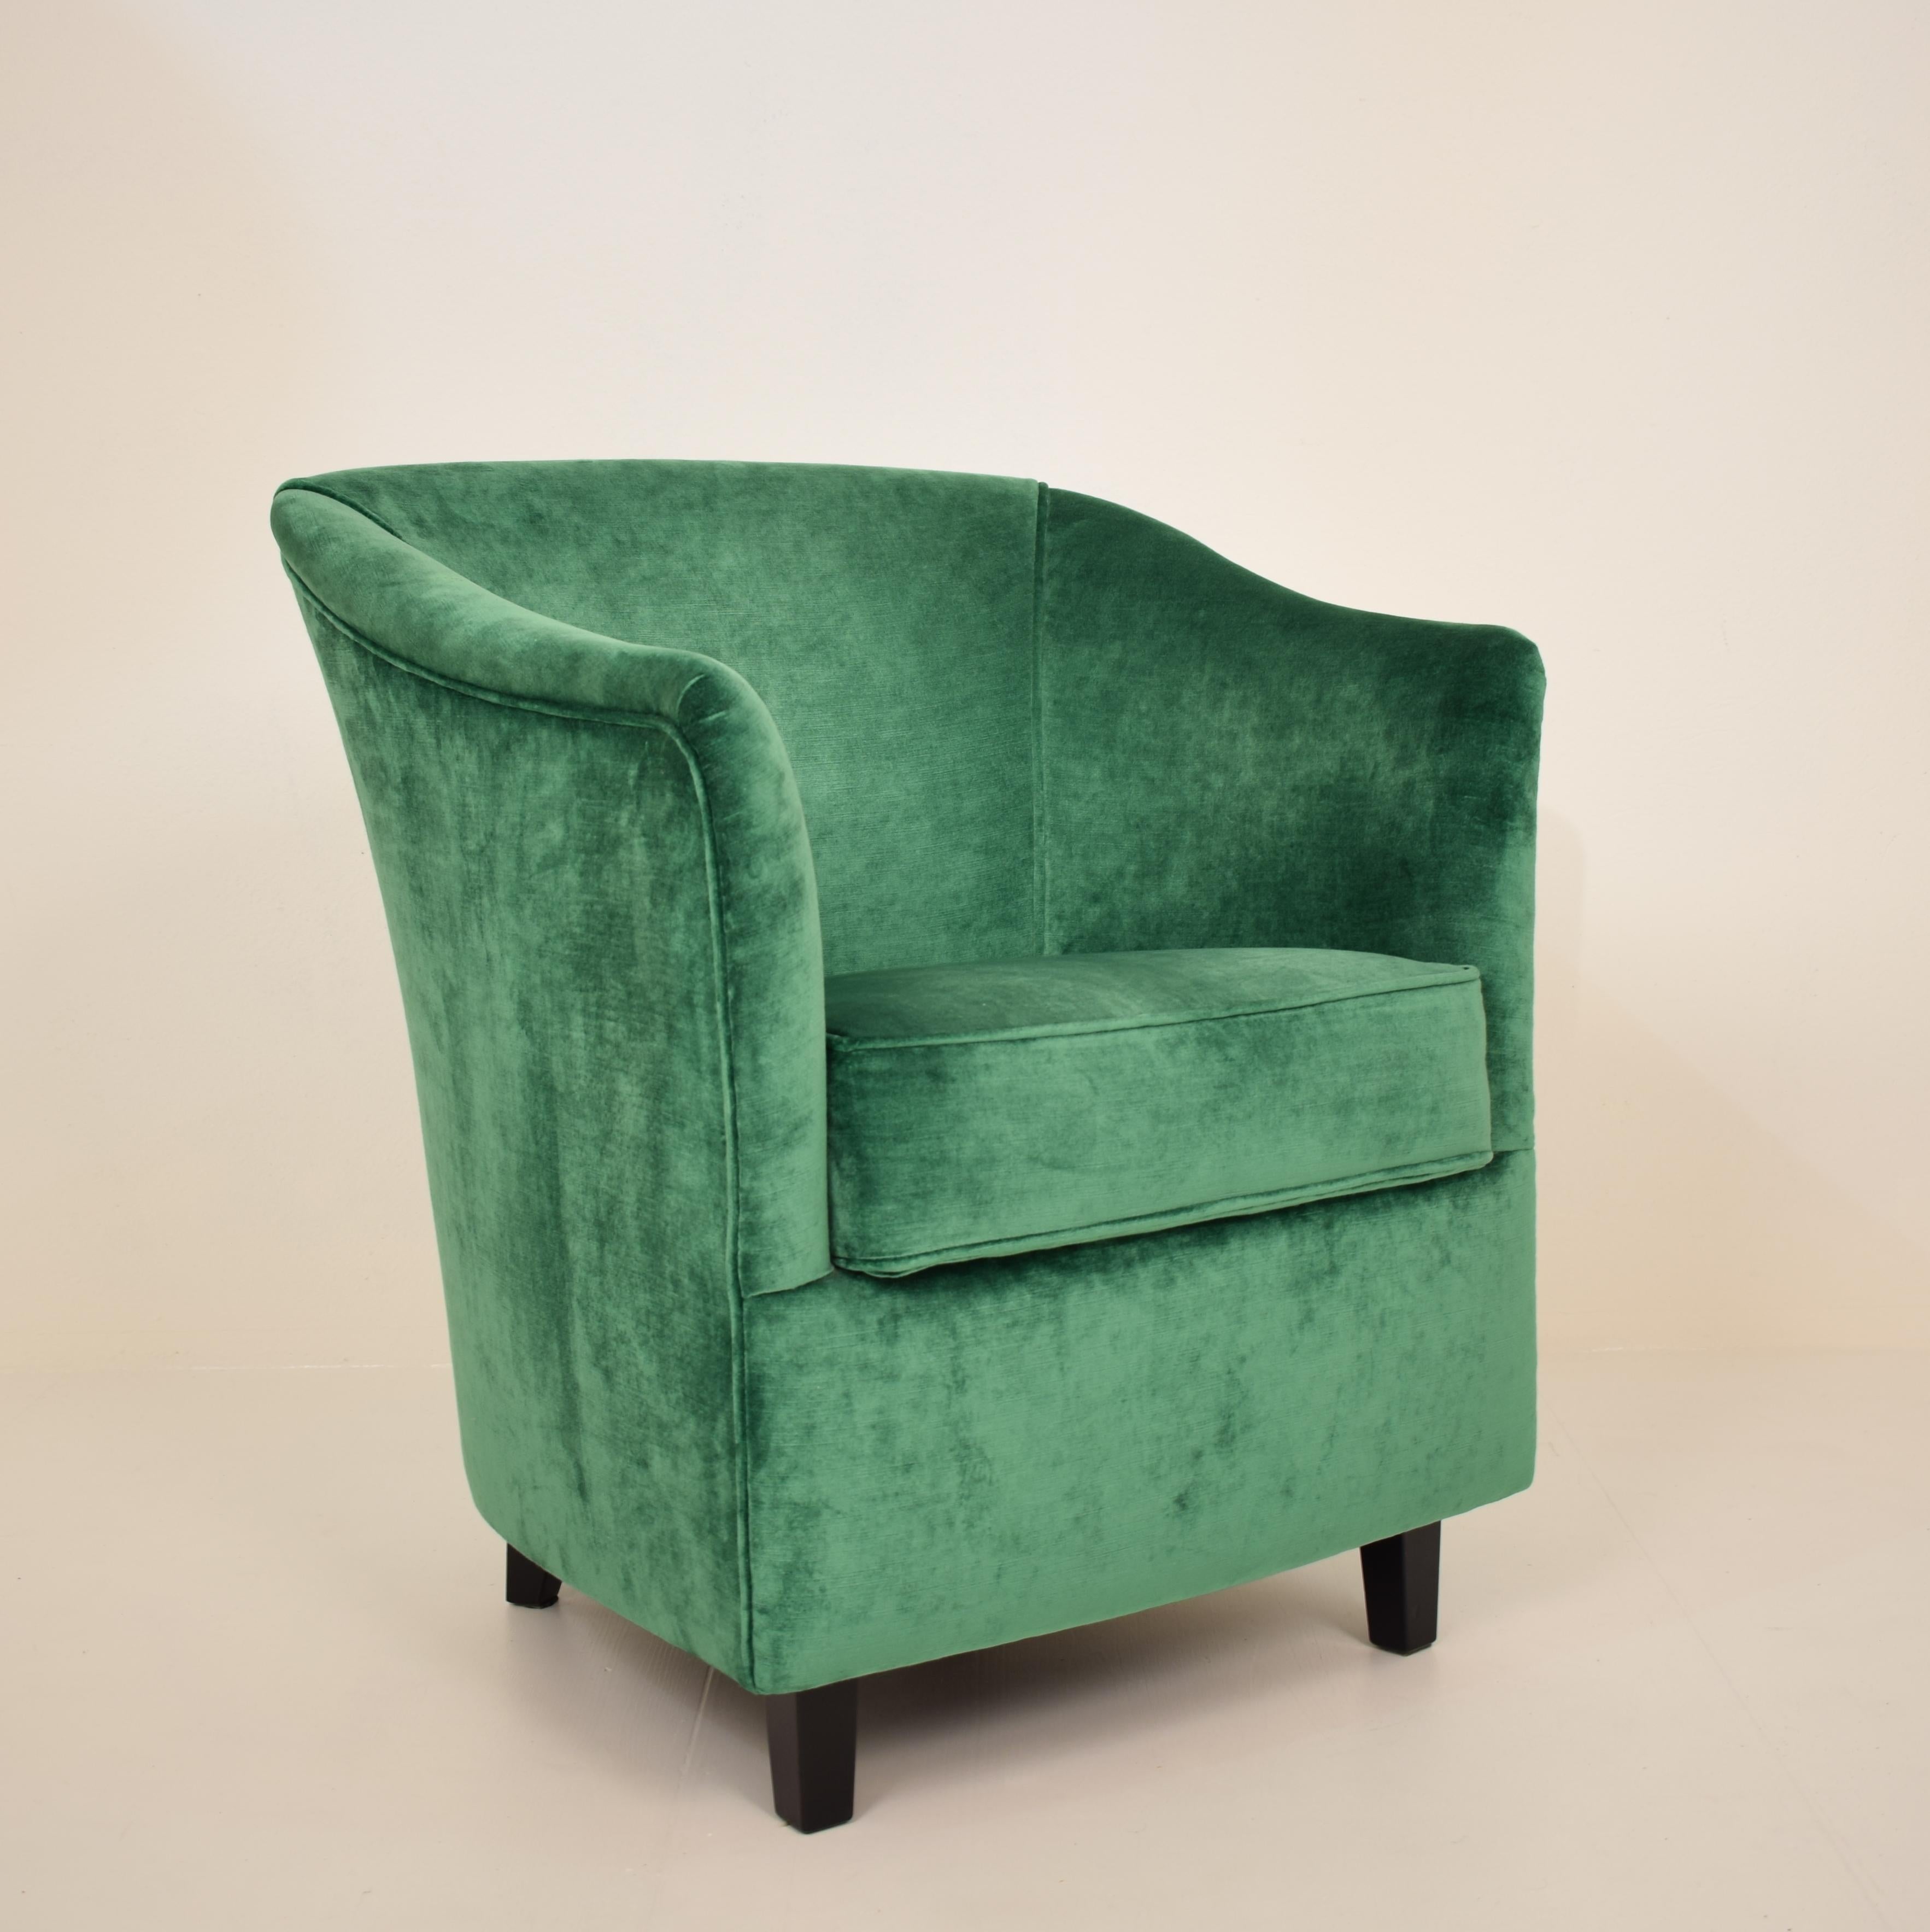 Late 20th Century Midcentury French Small Club Chair / Armchair in Green Velvet, circa 1980